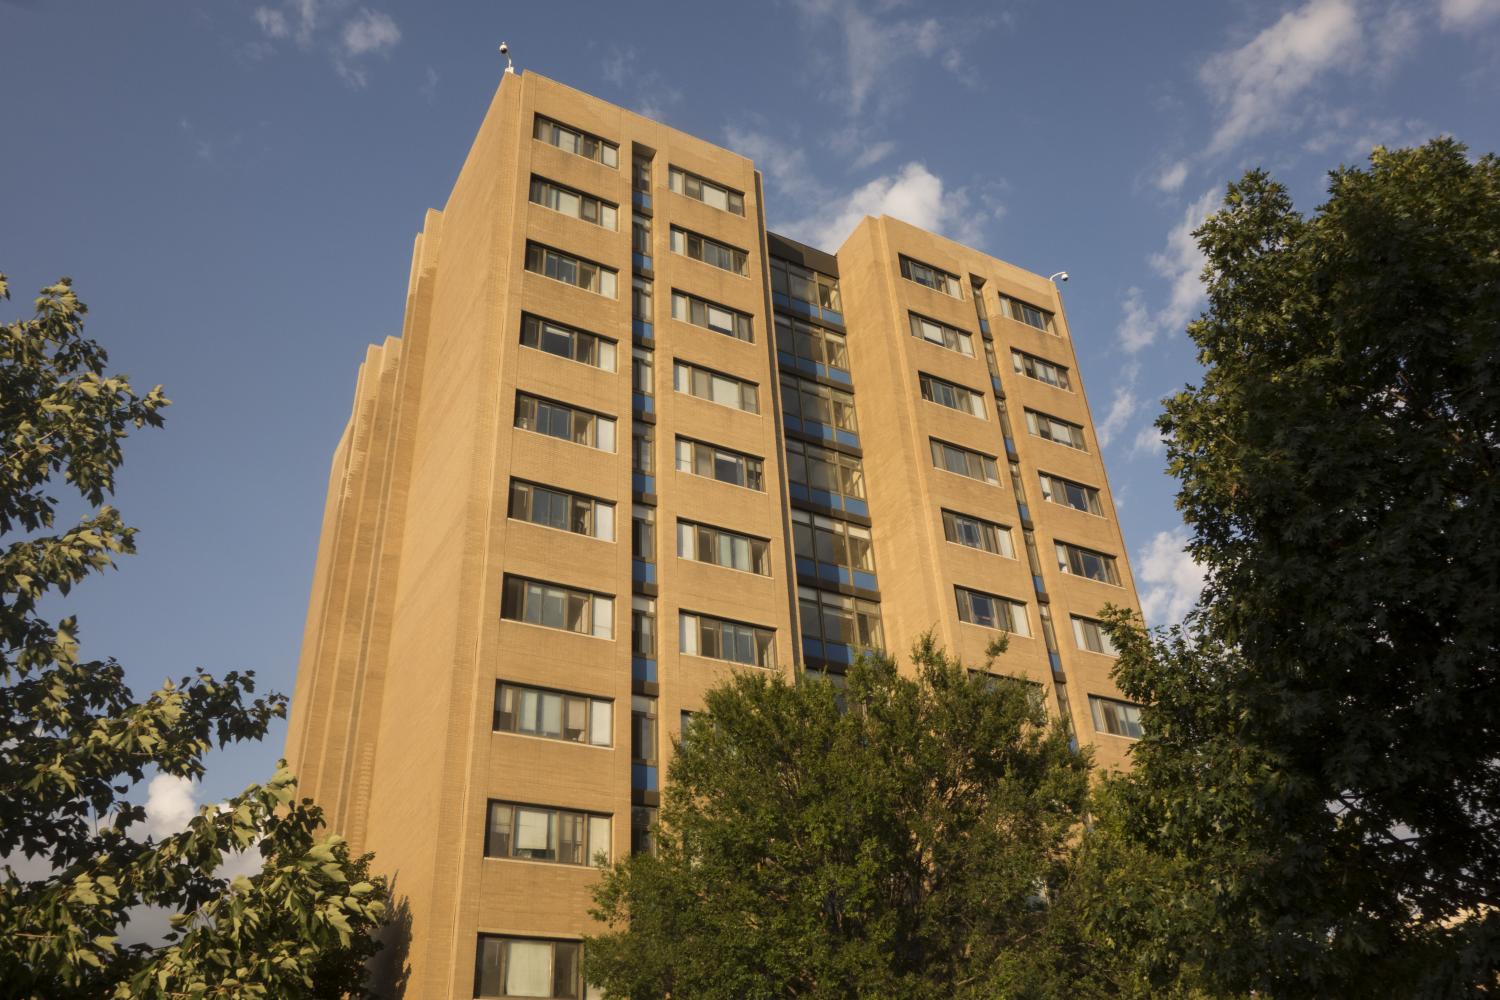 Second-years students had to choose new housing assignments due to an unexpectedly large first-year class.